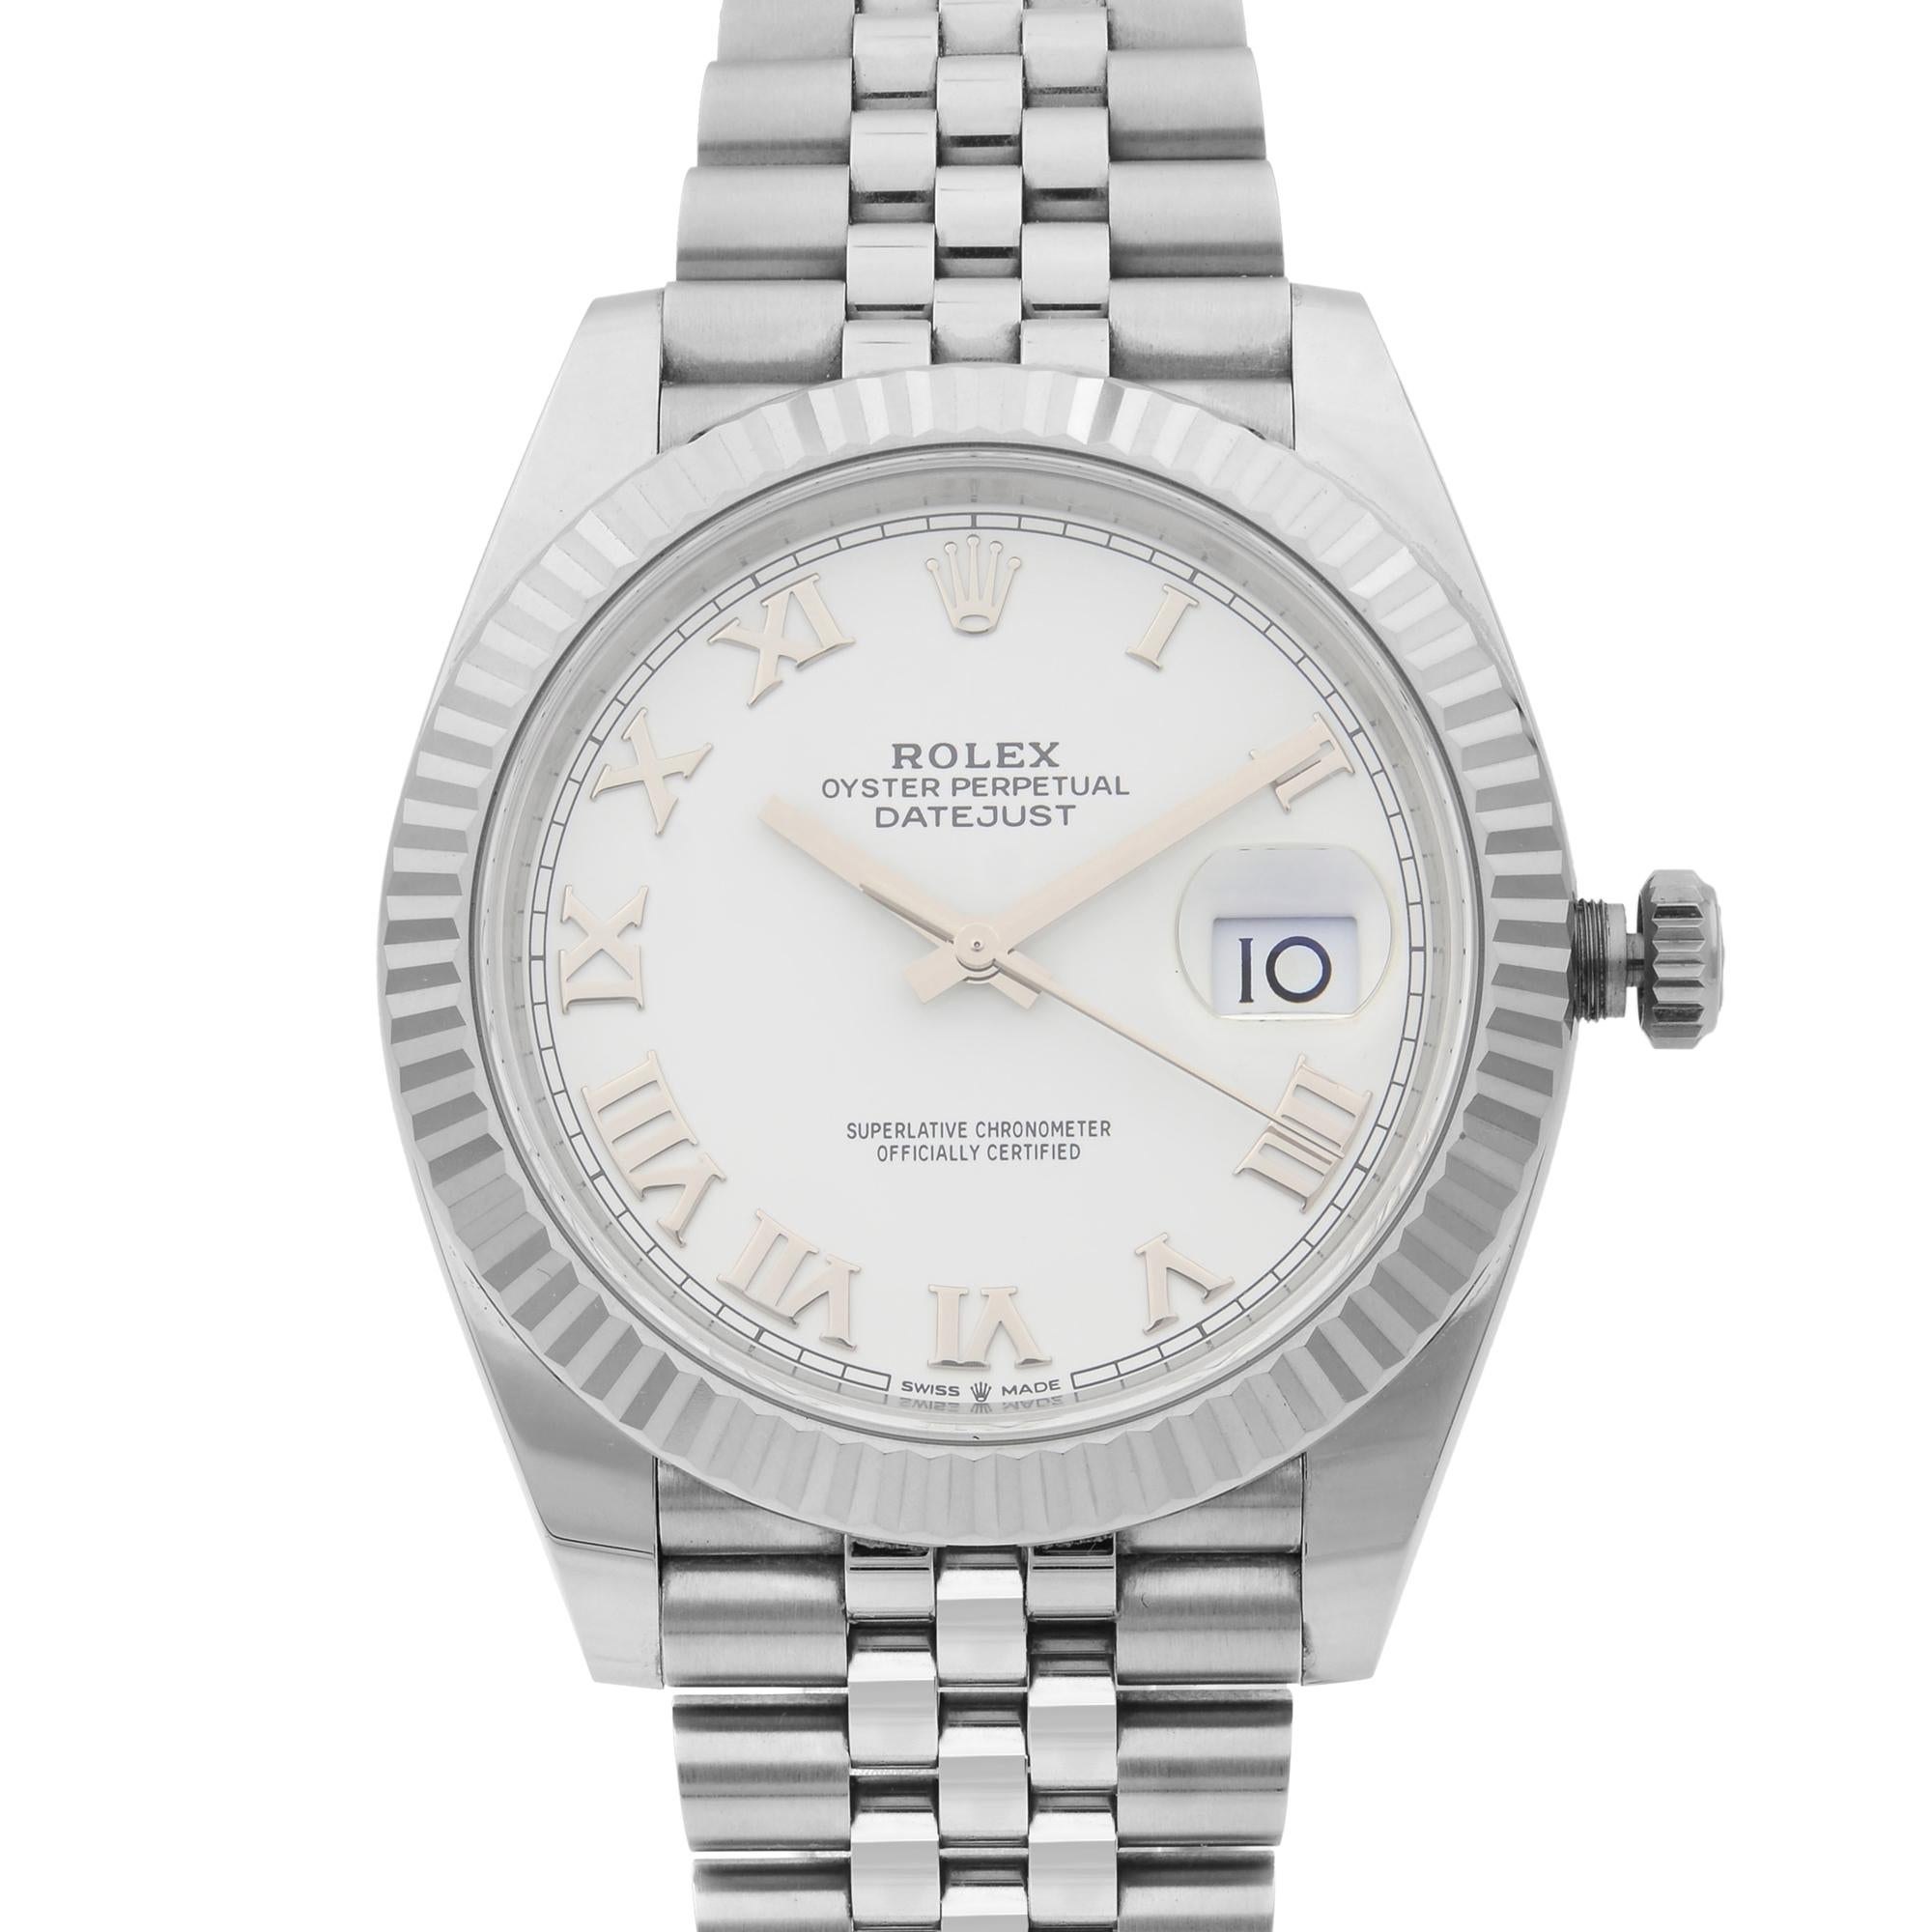 This pre-owned Rolex Datejust  126334 is a beautiful men's timepiece that is powered by mechanical (automatic) movement which is cased in a stainless steel case. It has a round shape face, date indicator dial and has hand roman numerals style